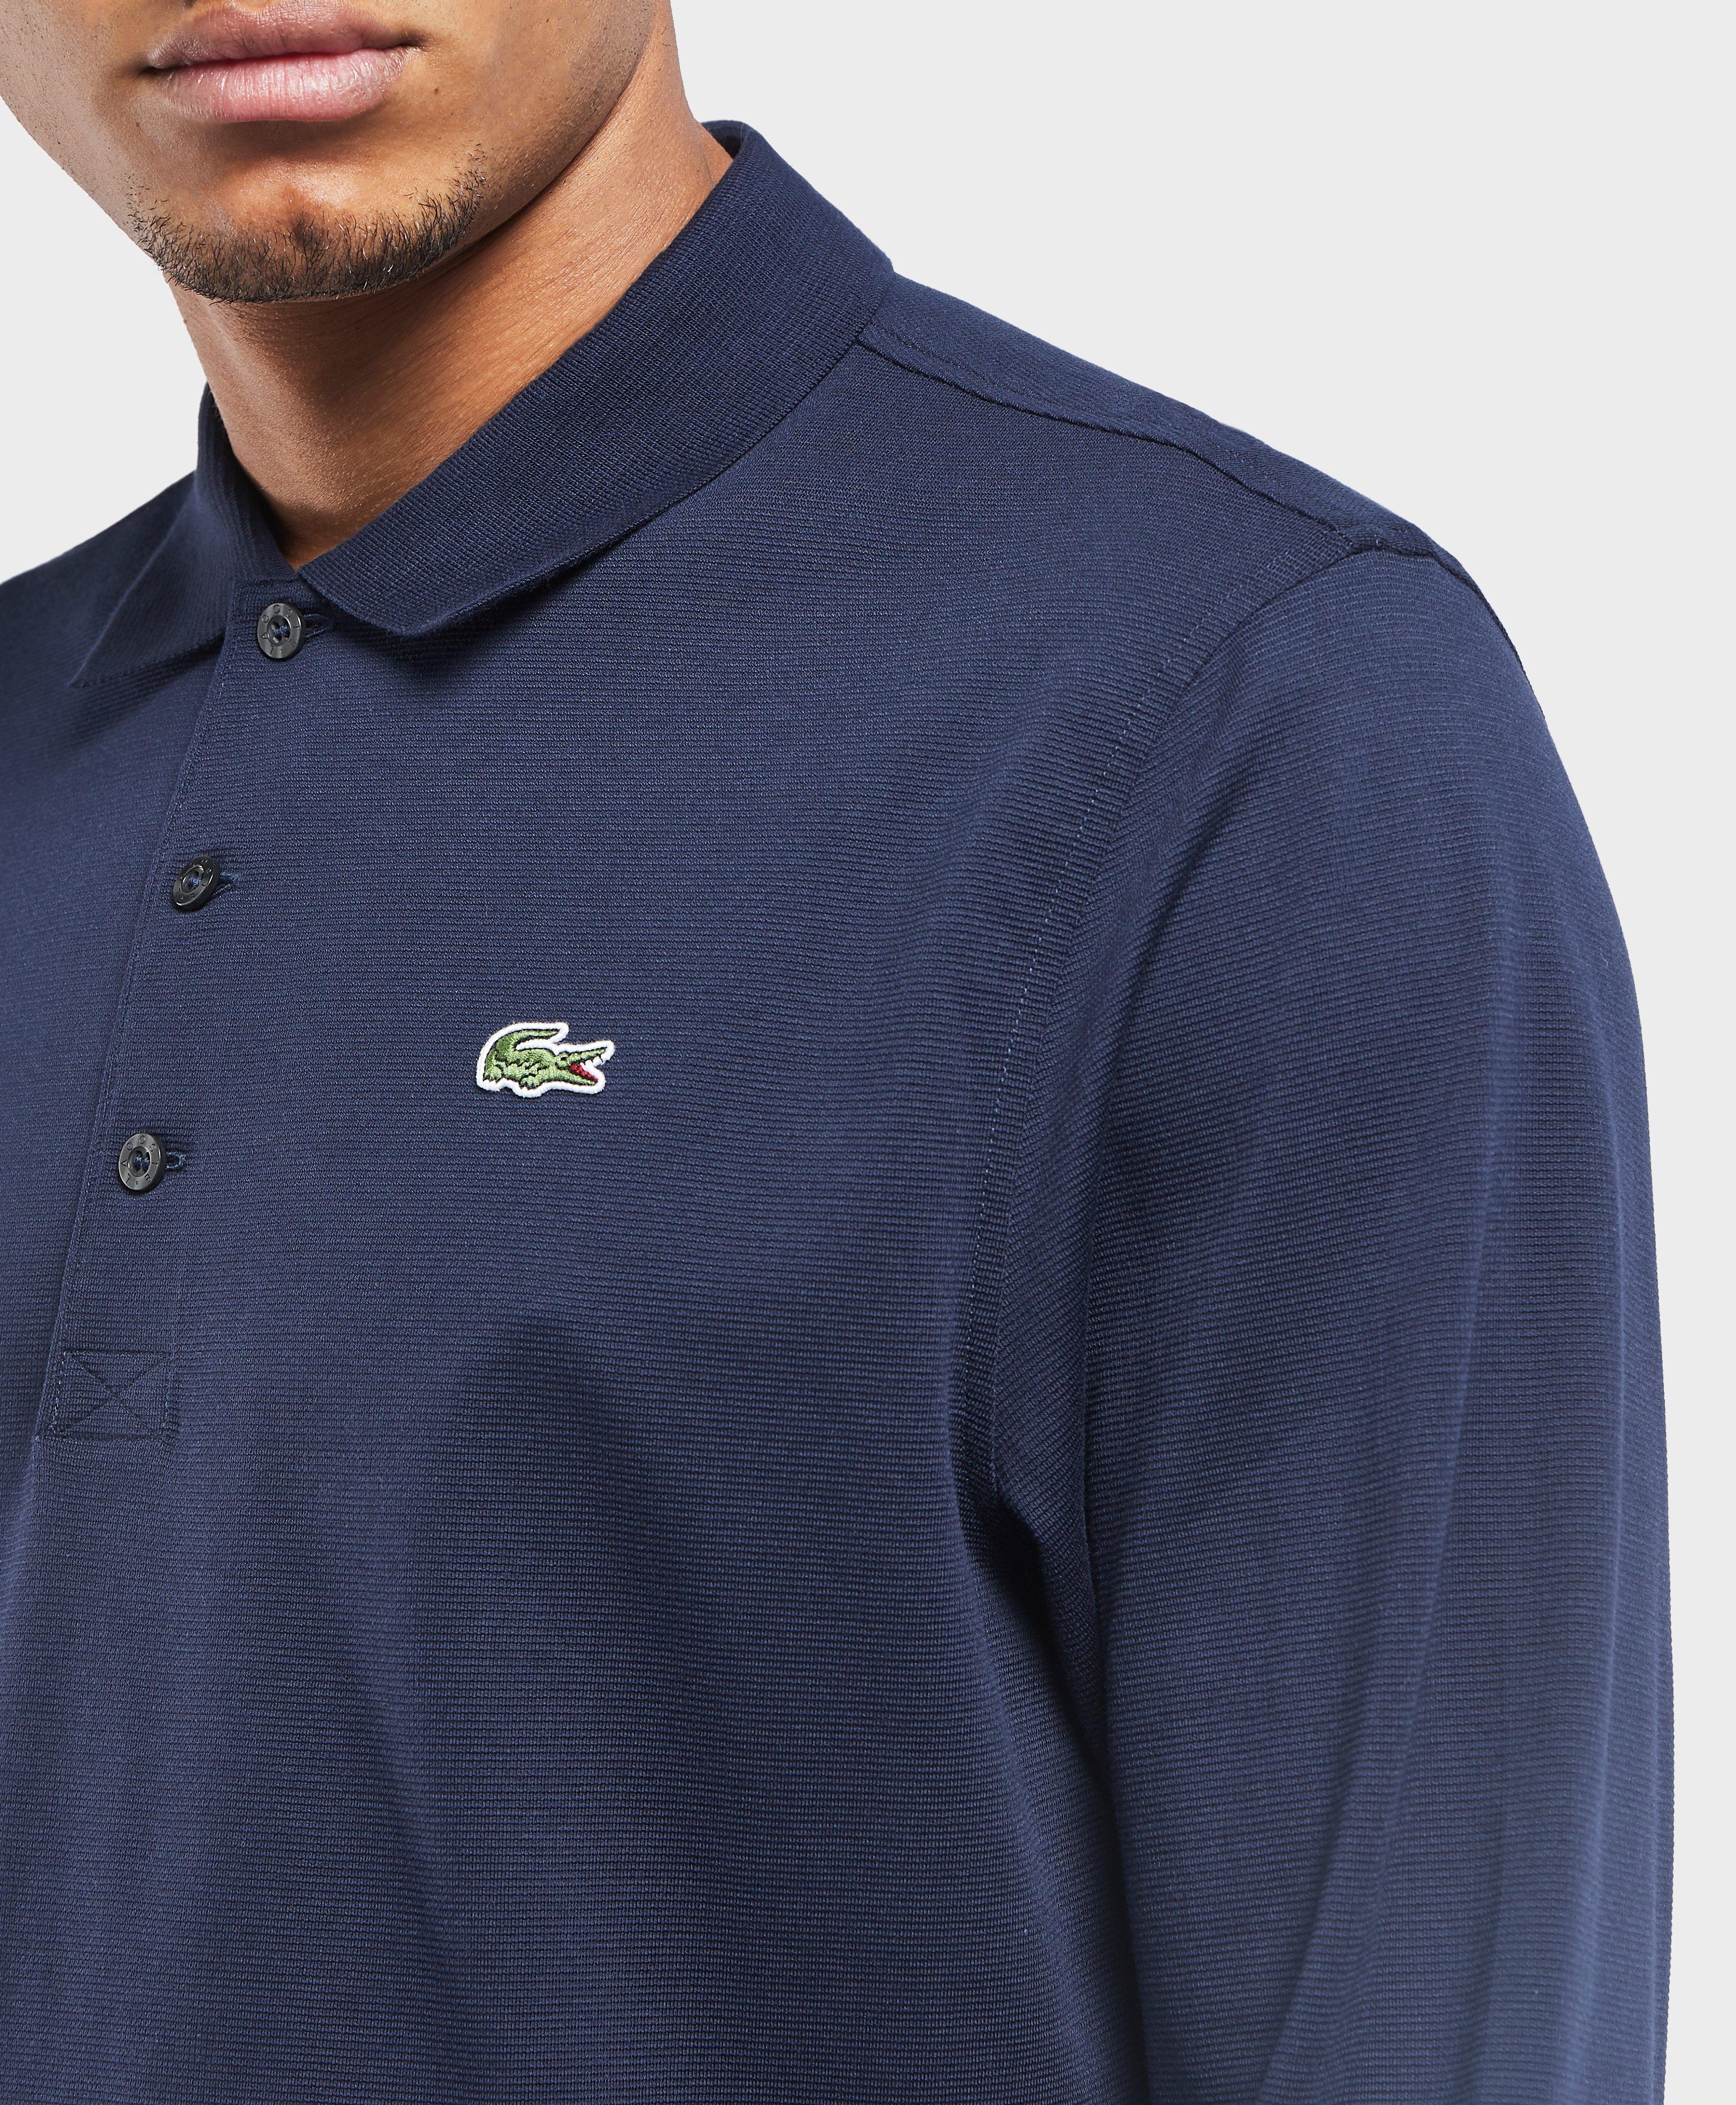 Lacoste Leather Alligator Long Sleeve Polo Shirt in Blue for Men - Lyst